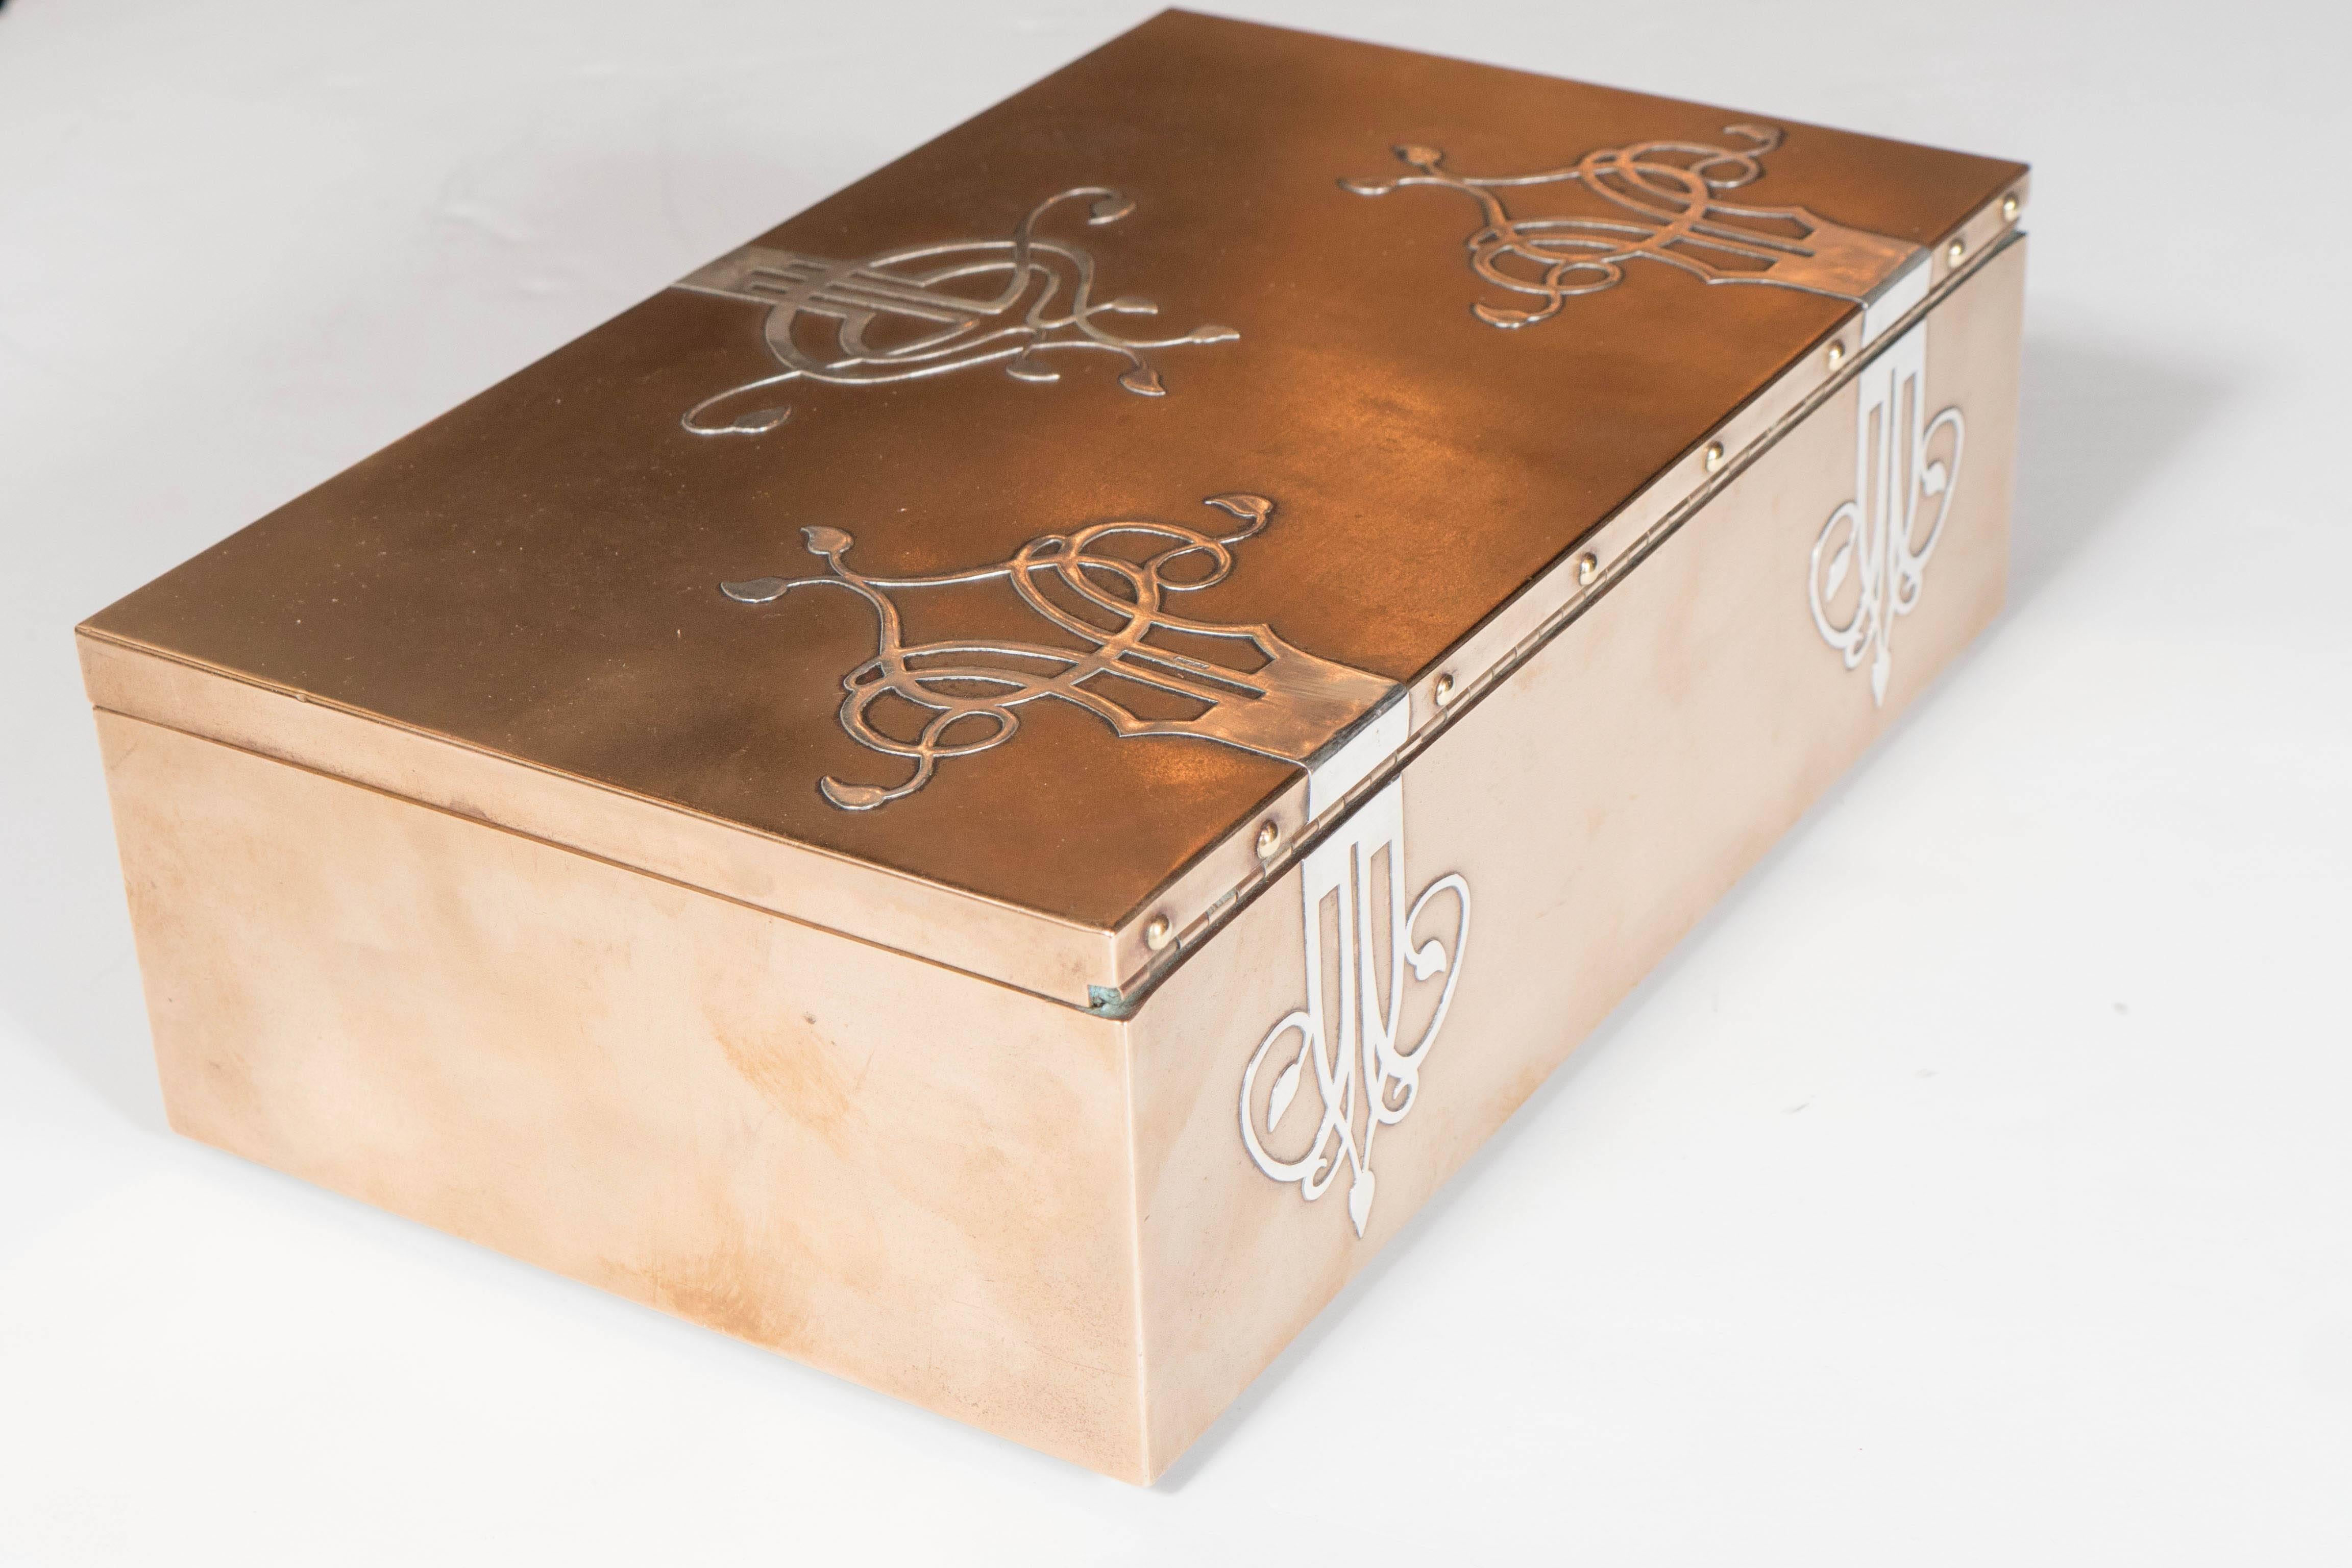 Gorgeous Aesthetic Movement Bronze Box with Sterling Silver Overlay by Heintz 2